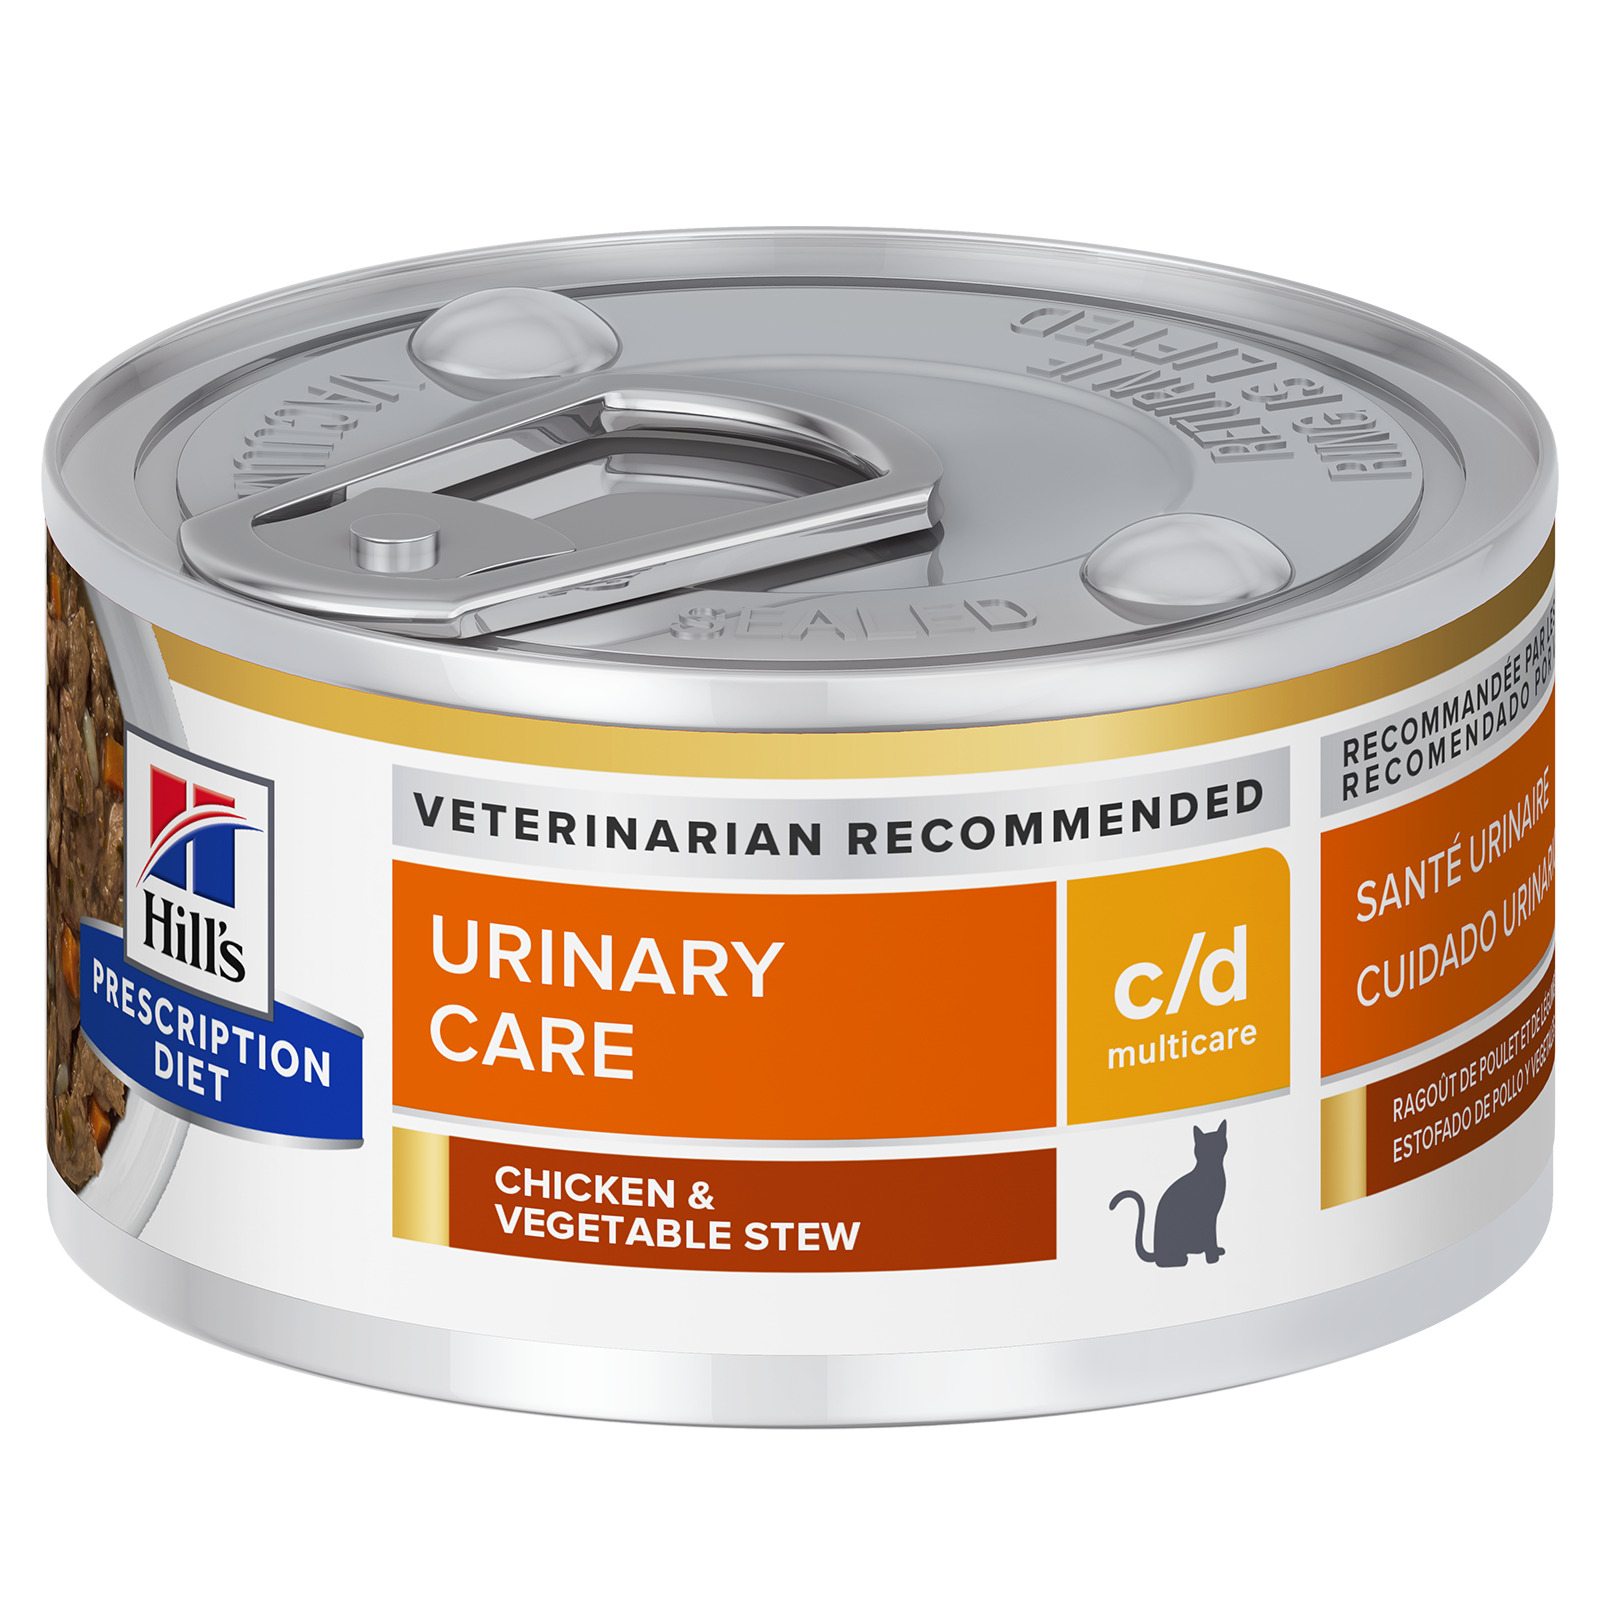 Hill's Prescription Diet Cat Food Can c/d Multicare Urinary Care Chicken & Vegetable Stew